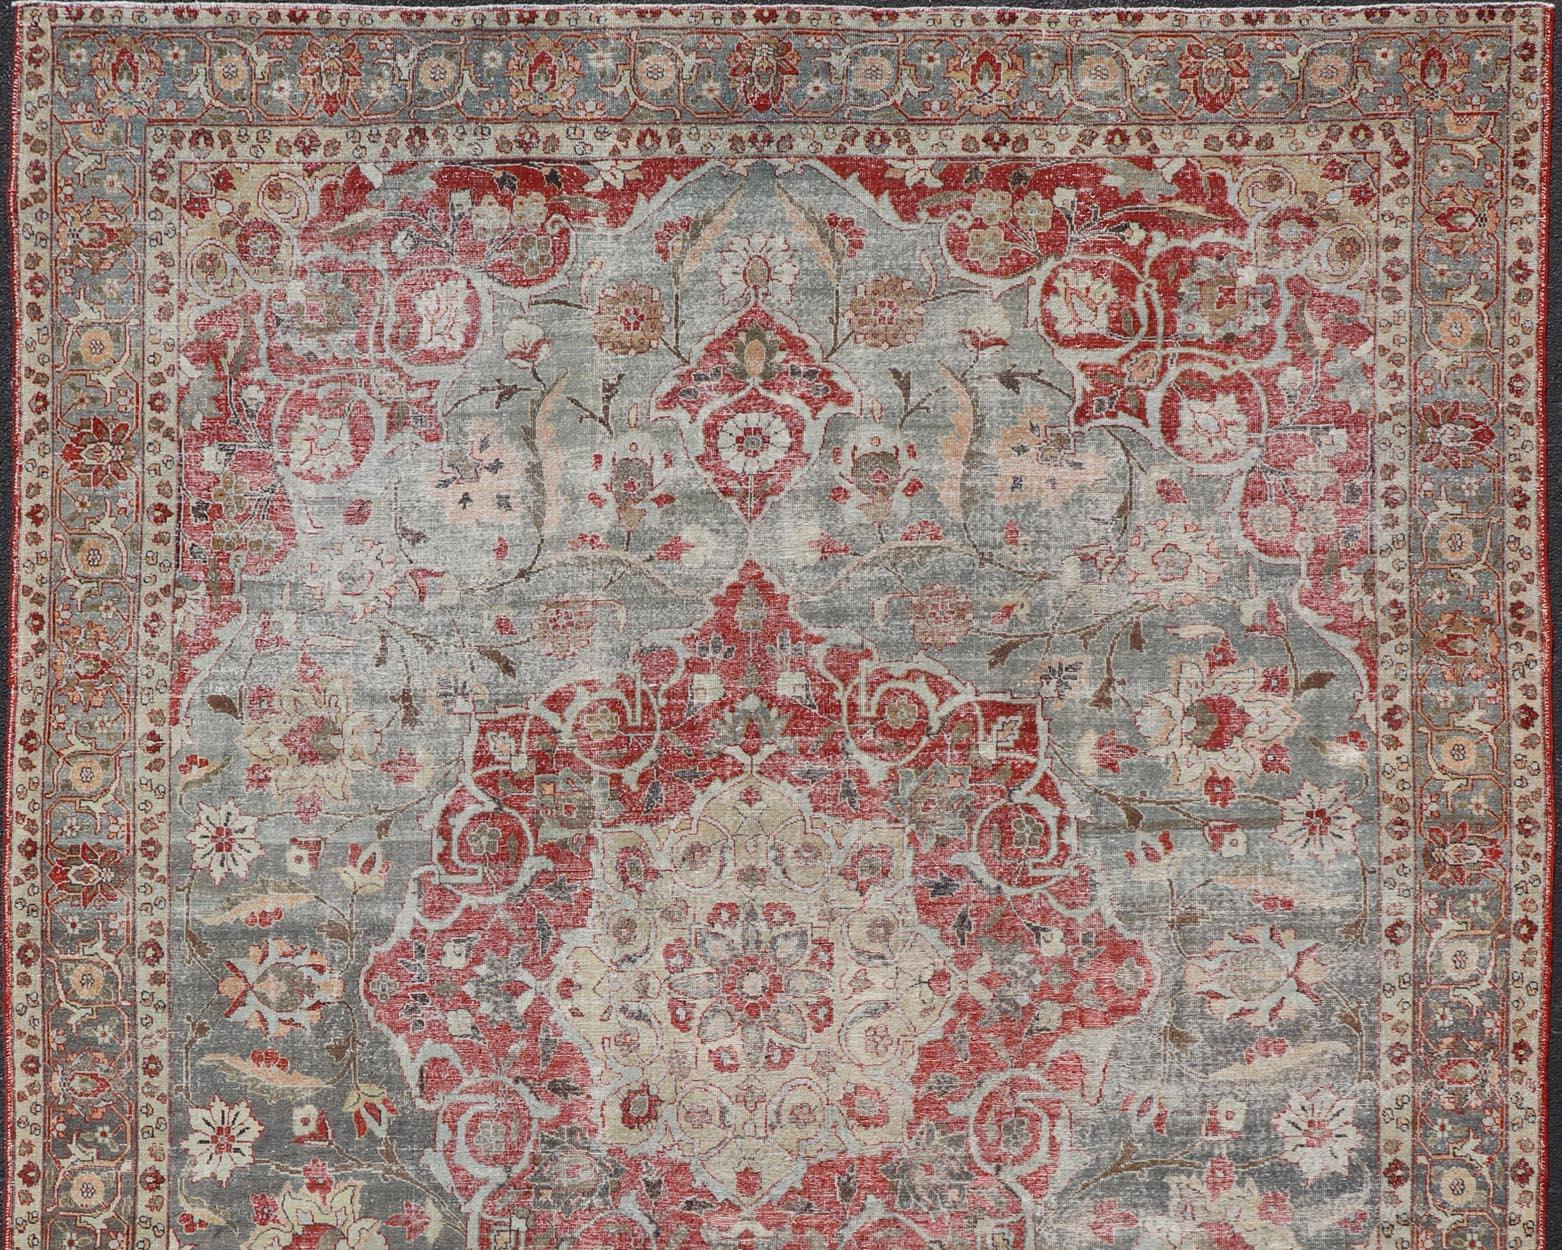 Antique Persian Tabriz Rug with Floral Medallion Design in Tan, Red, and Lt Blue For Sale 7